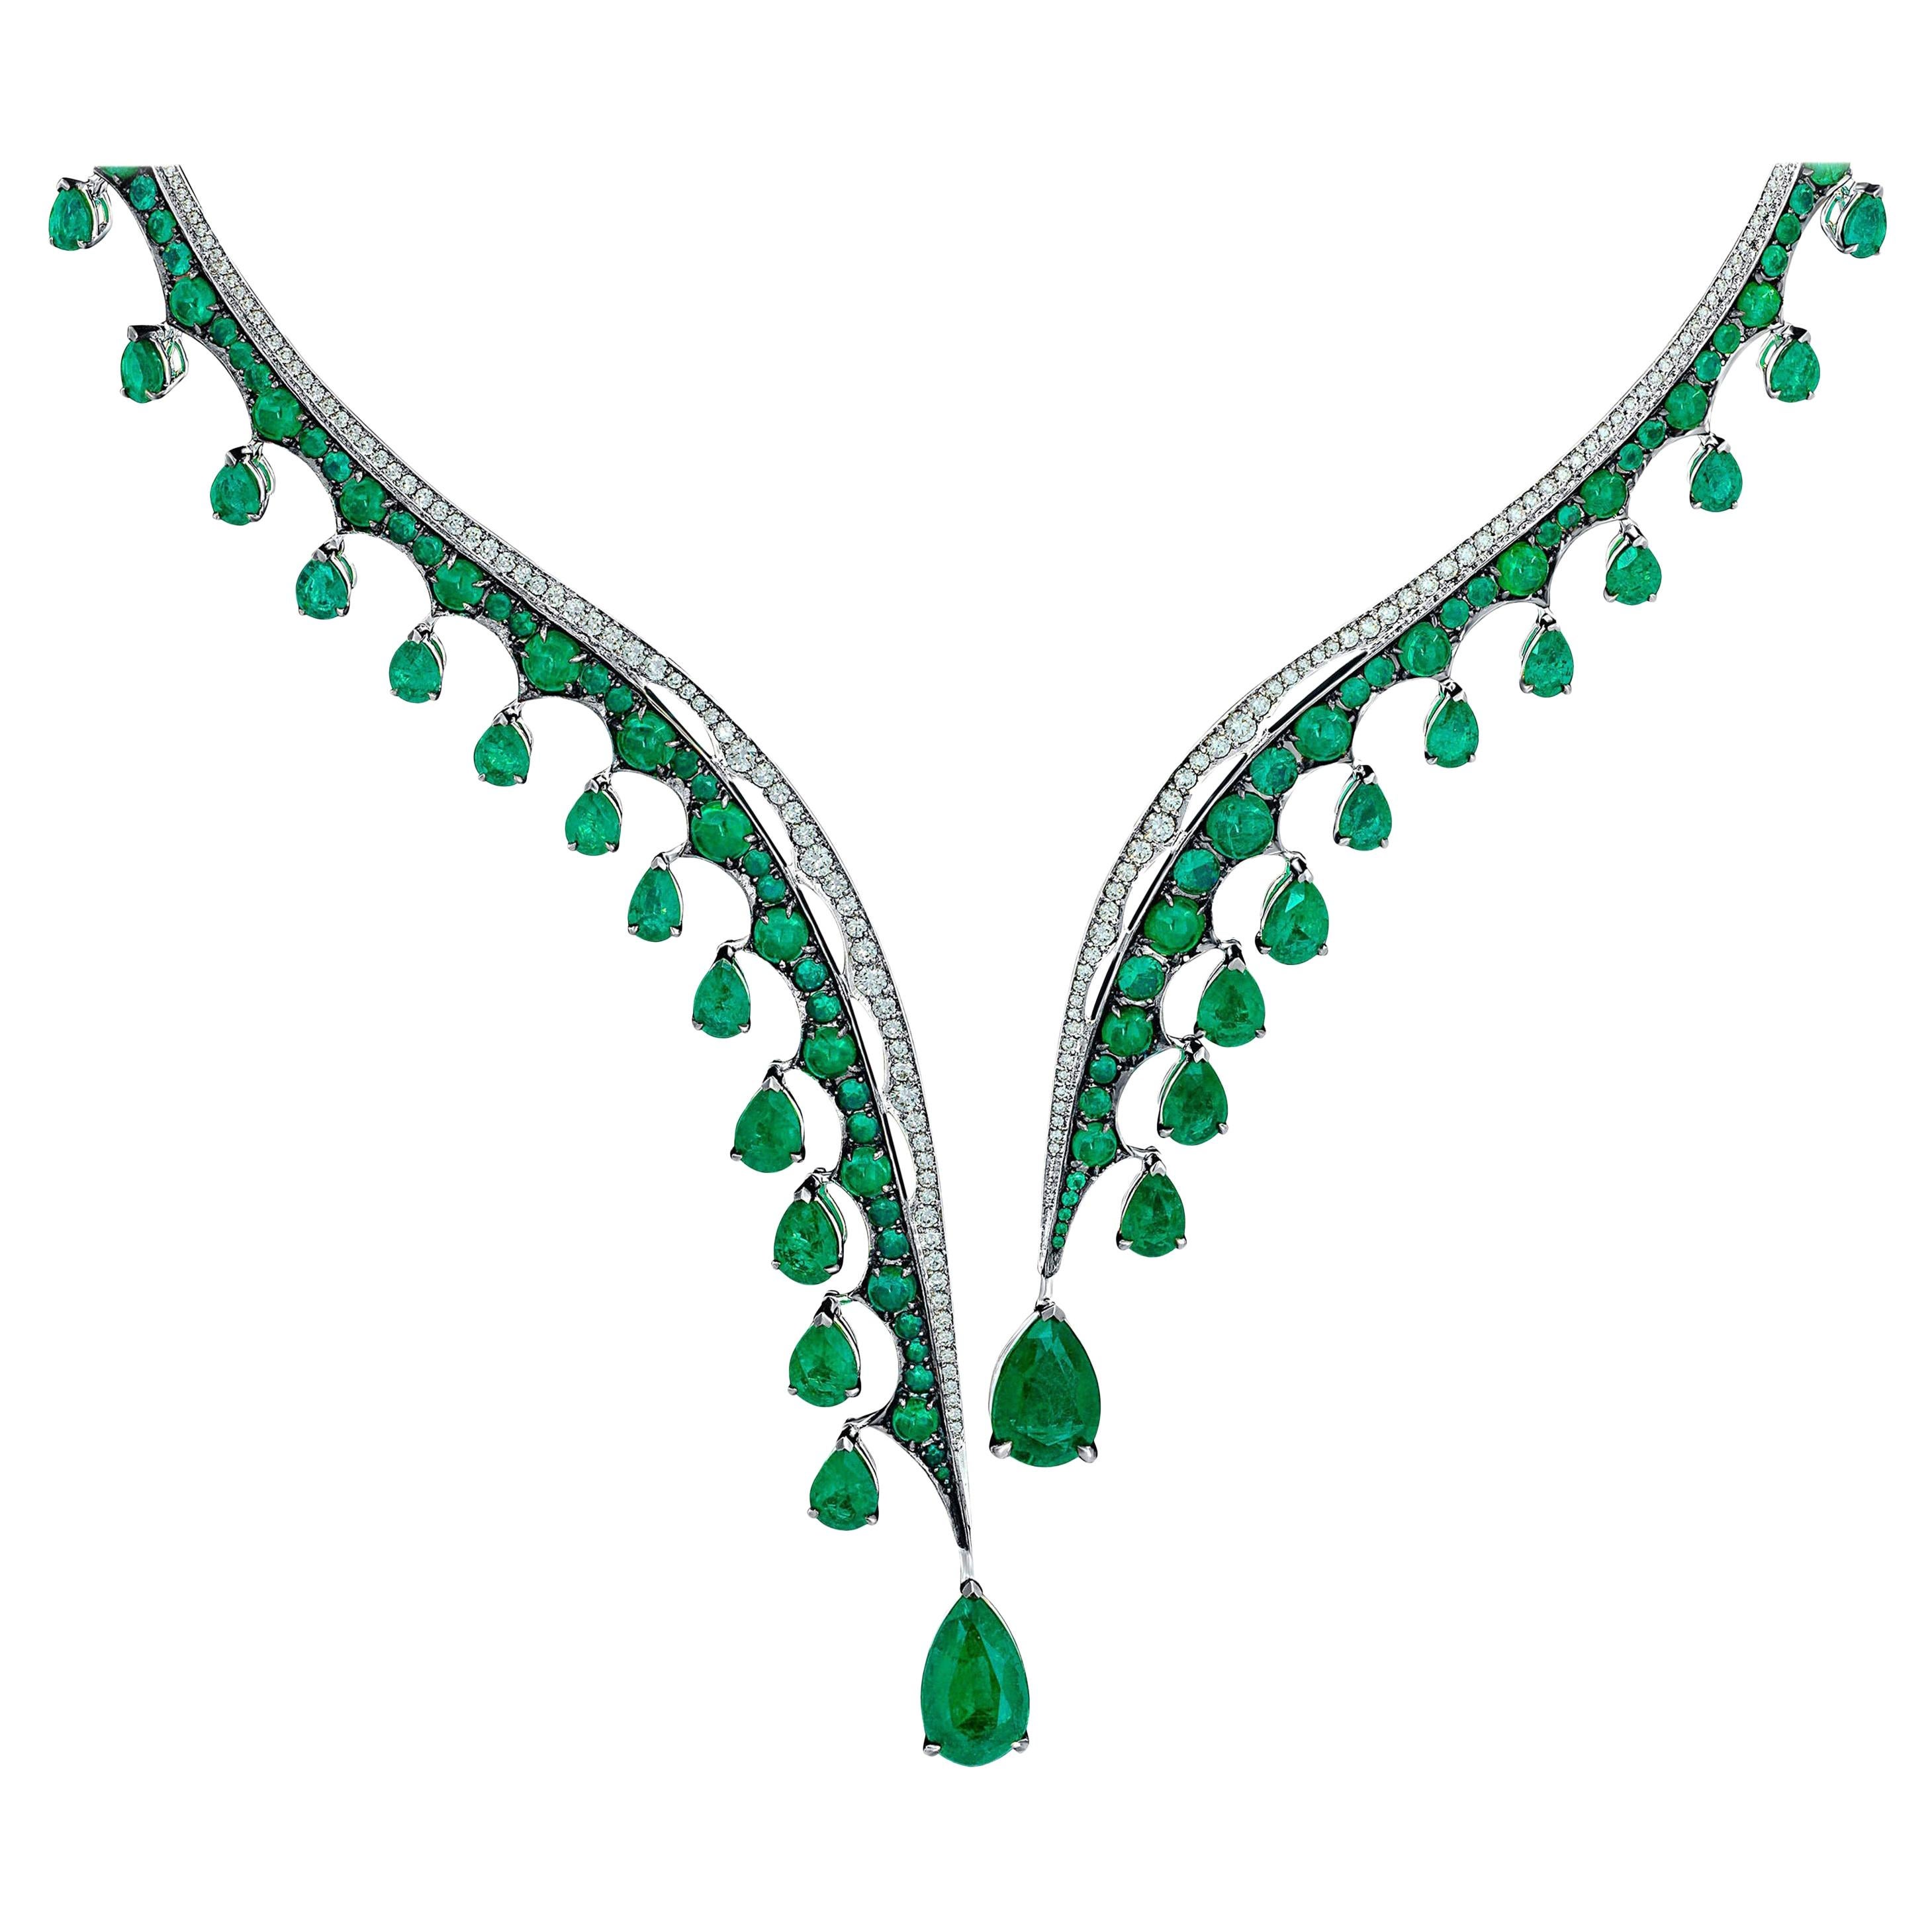 18 Karat White Gold and White Diamonds Ethically Sourced Emeralds Necklace